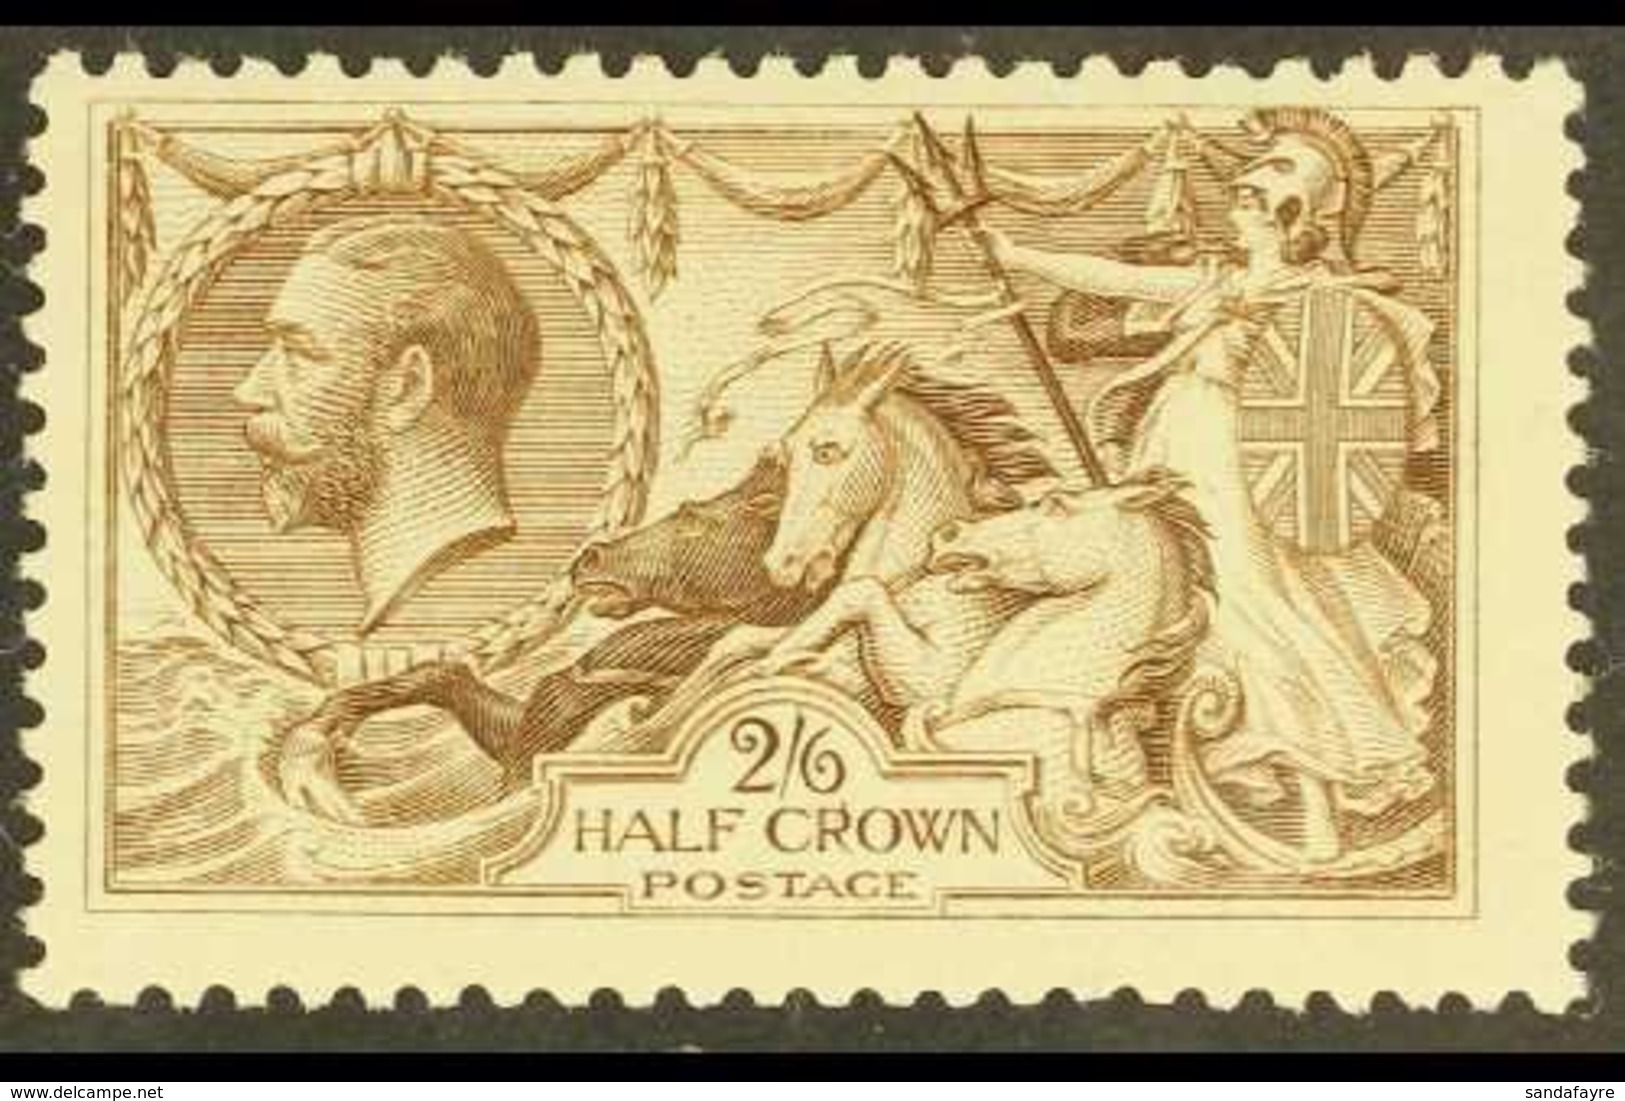 1918-19  2s6d Pale Brown Seahorse, B.W. Printing, SG 415a, Never Hinged Mint. For More Images, Please Visit Http://www.s - Unclassified